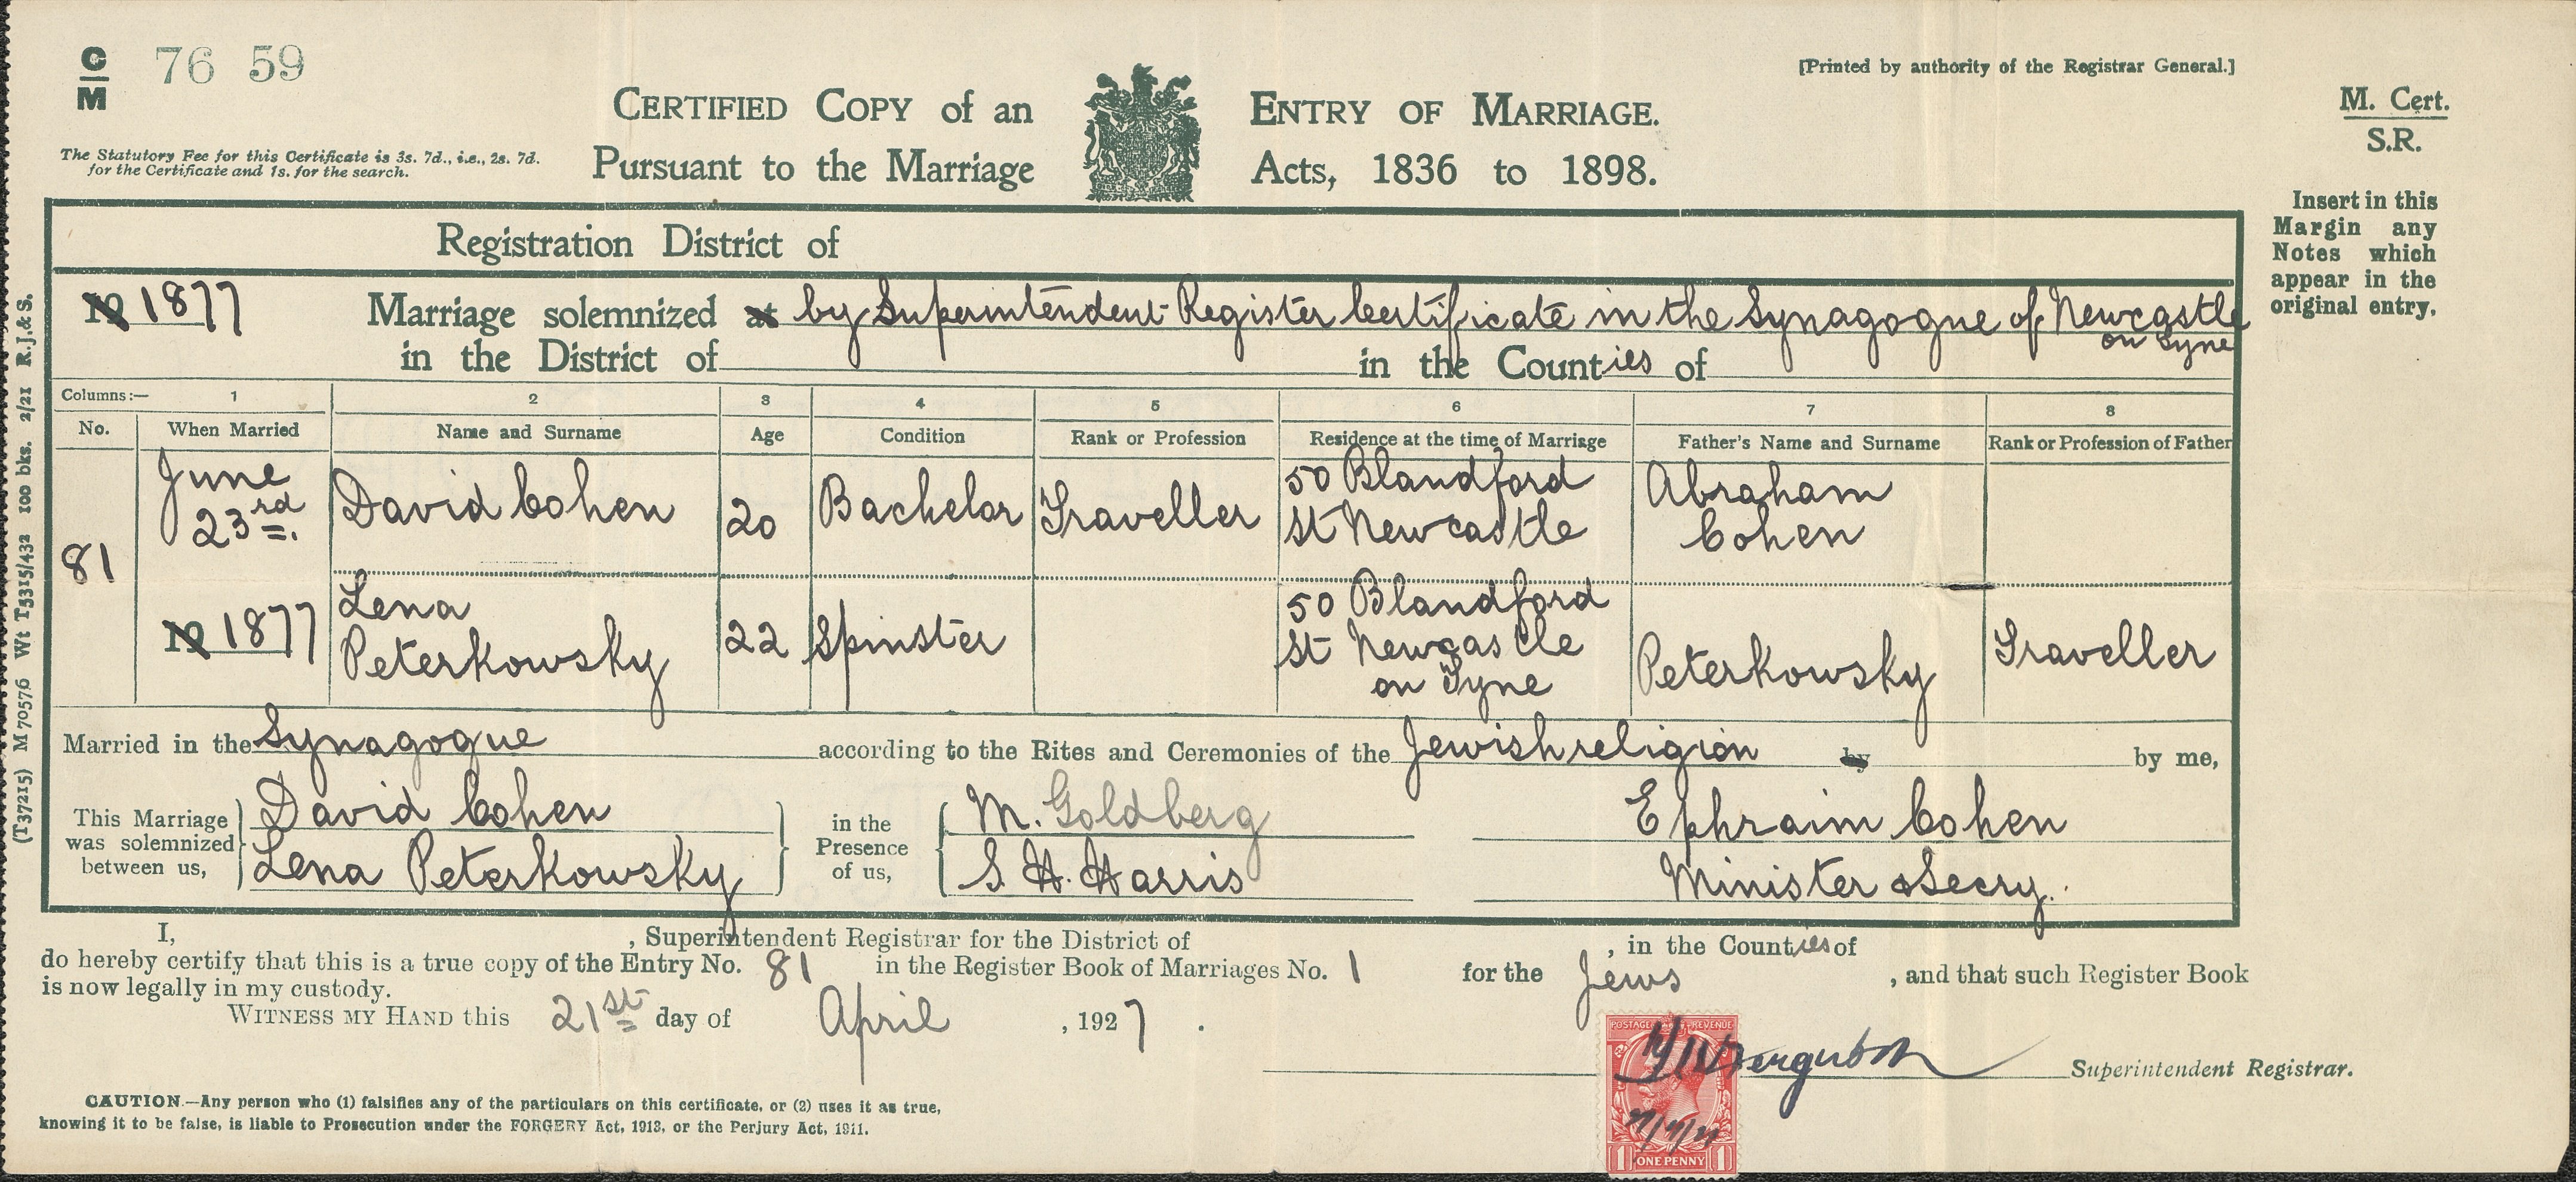 Marriage certificate – marriage between David Cohen and Lena Peterowsky in 1877.